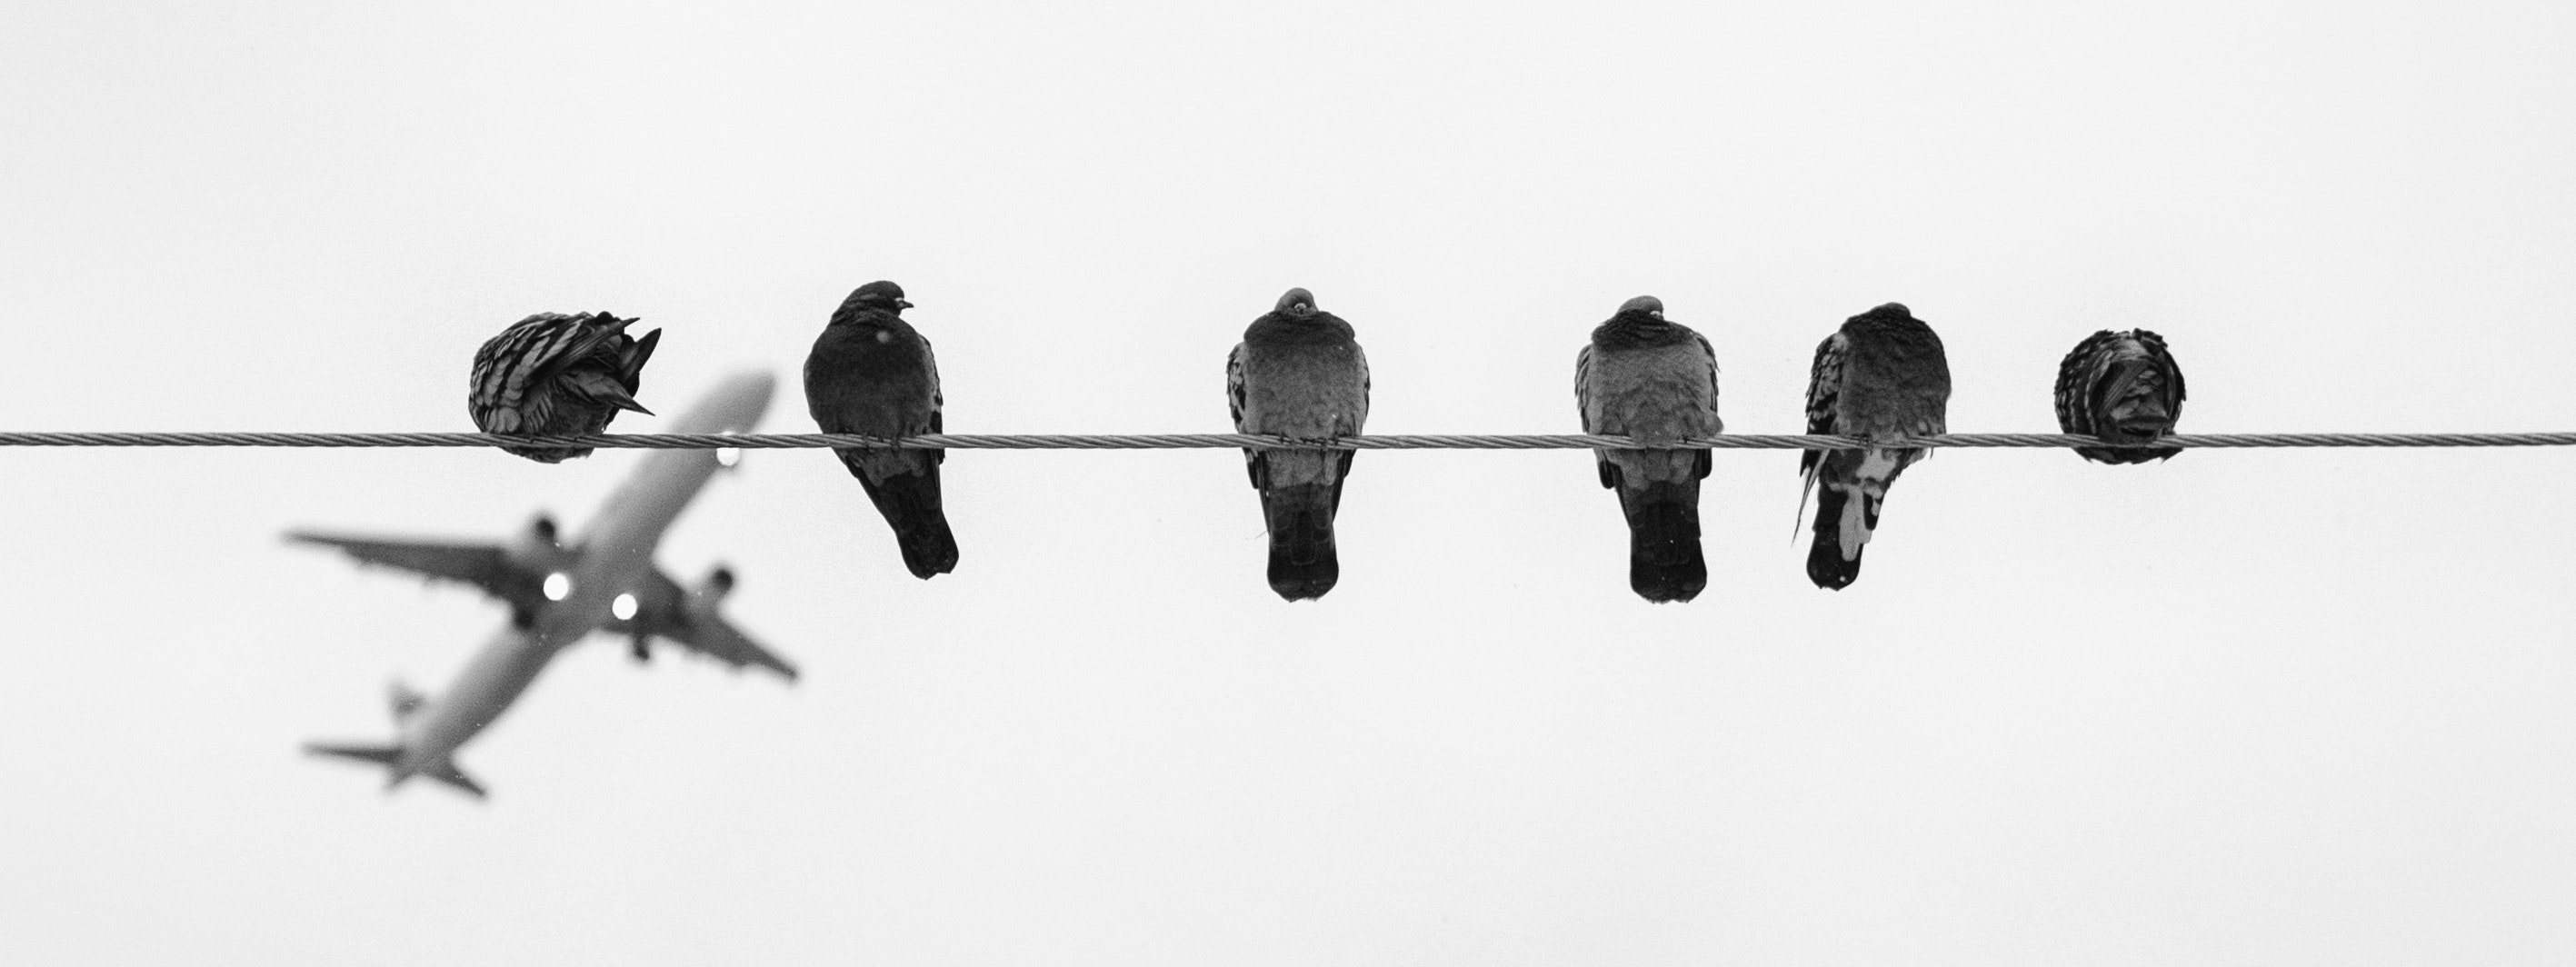 Black and grey birds on wire during daytime photo